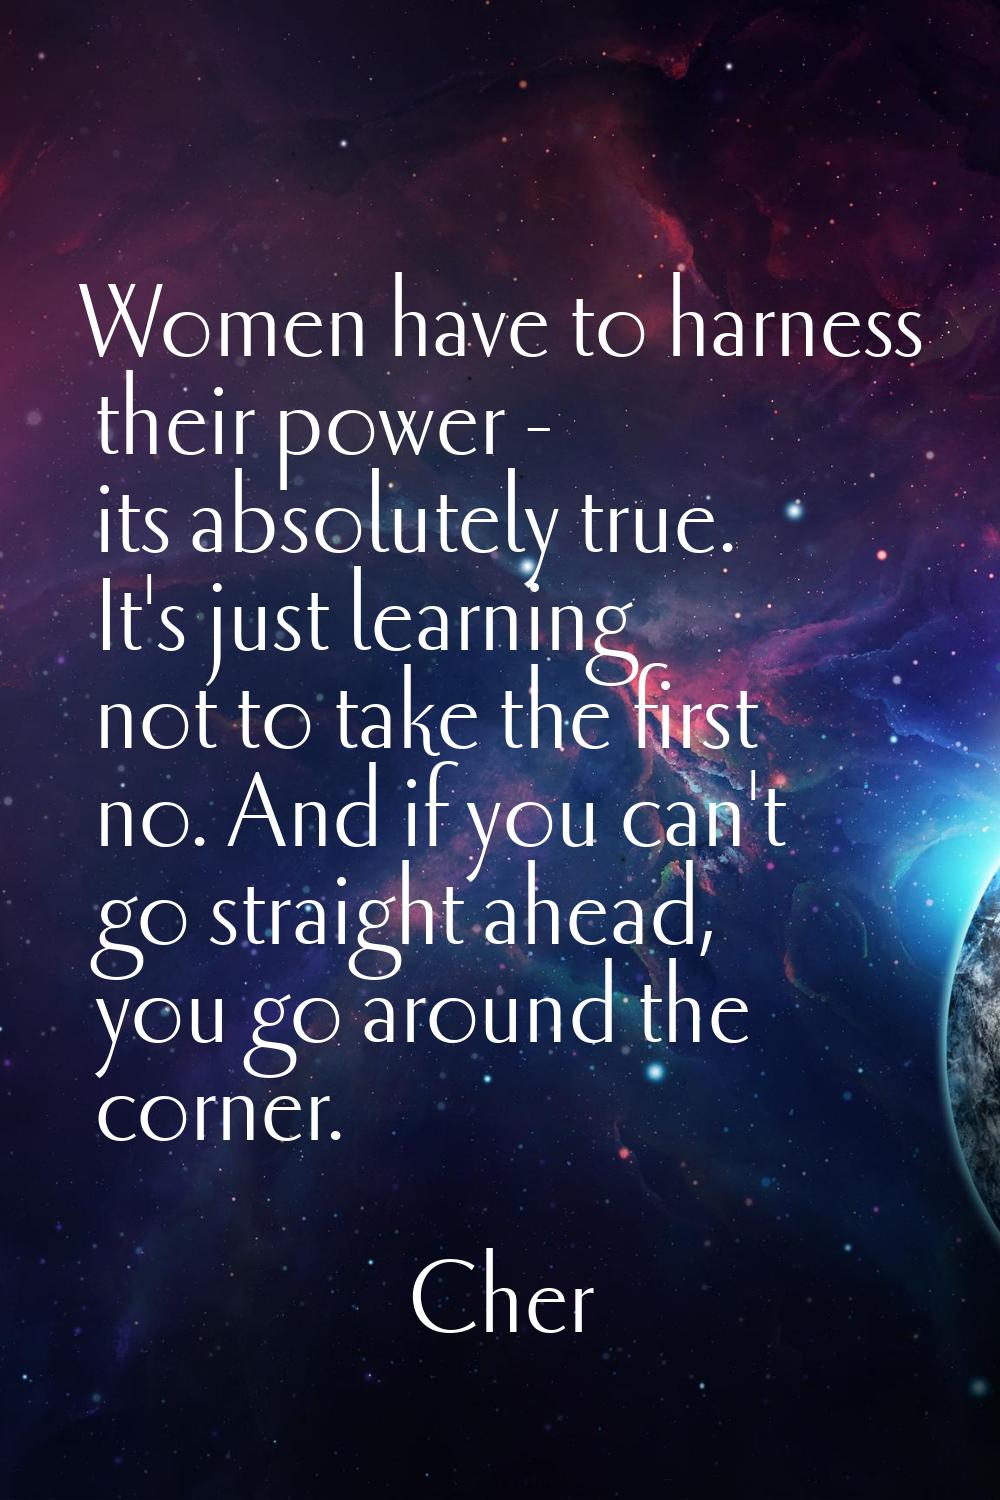 Women have to harness their power - its absolutely true. It's just learning not to take the first n